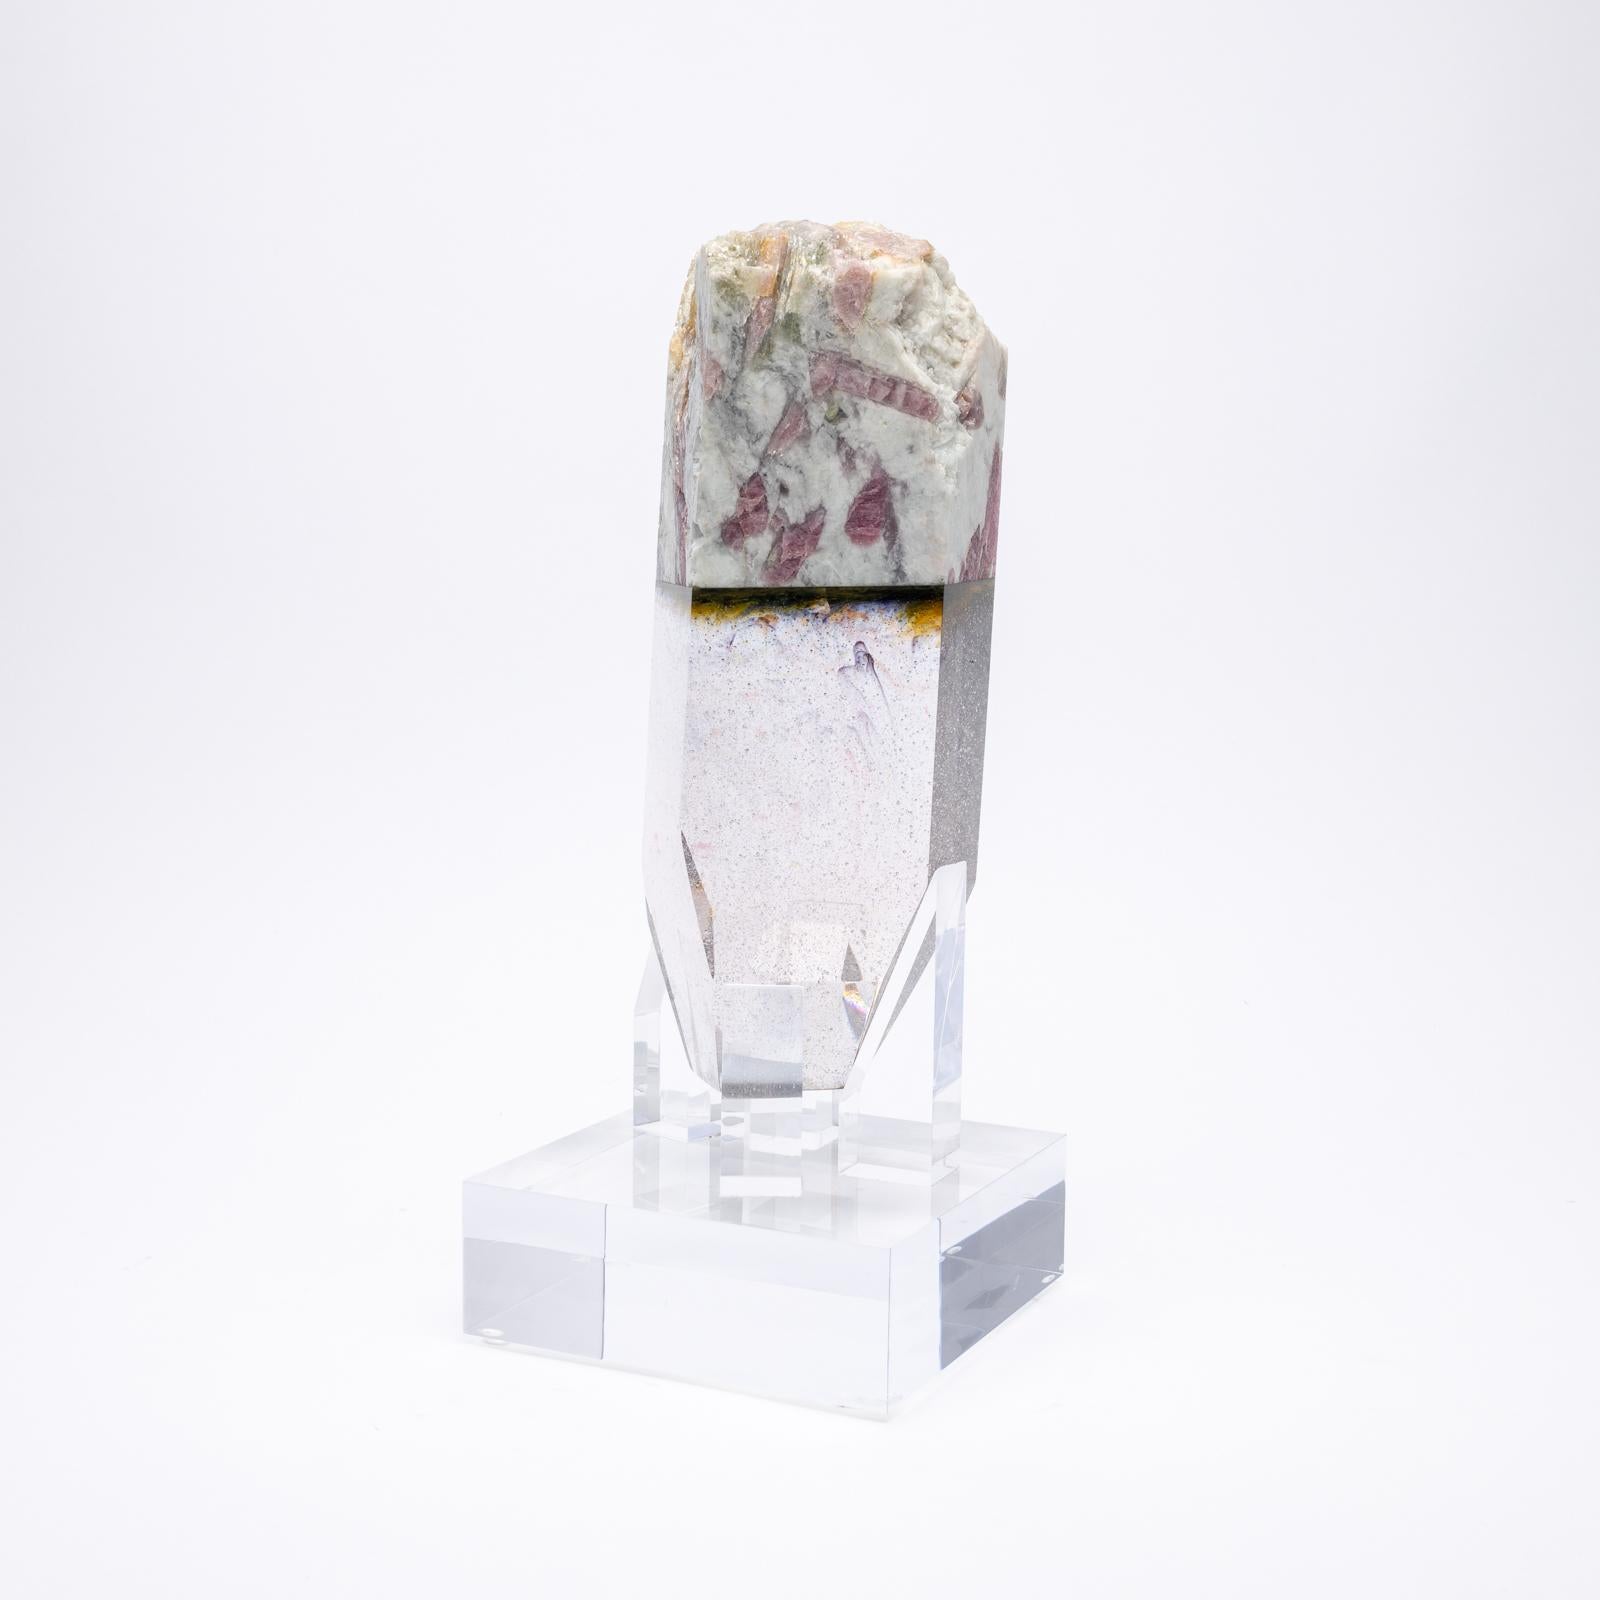 Pynkypyne, watermelon tourmaline and quartz organic shape glass fusion sculpture from TYME collection, a collaboration by Orfeo Quagliata and Ernesto Durán

TYME collection 
A dance between purity and detail bring a creation of unique pieces